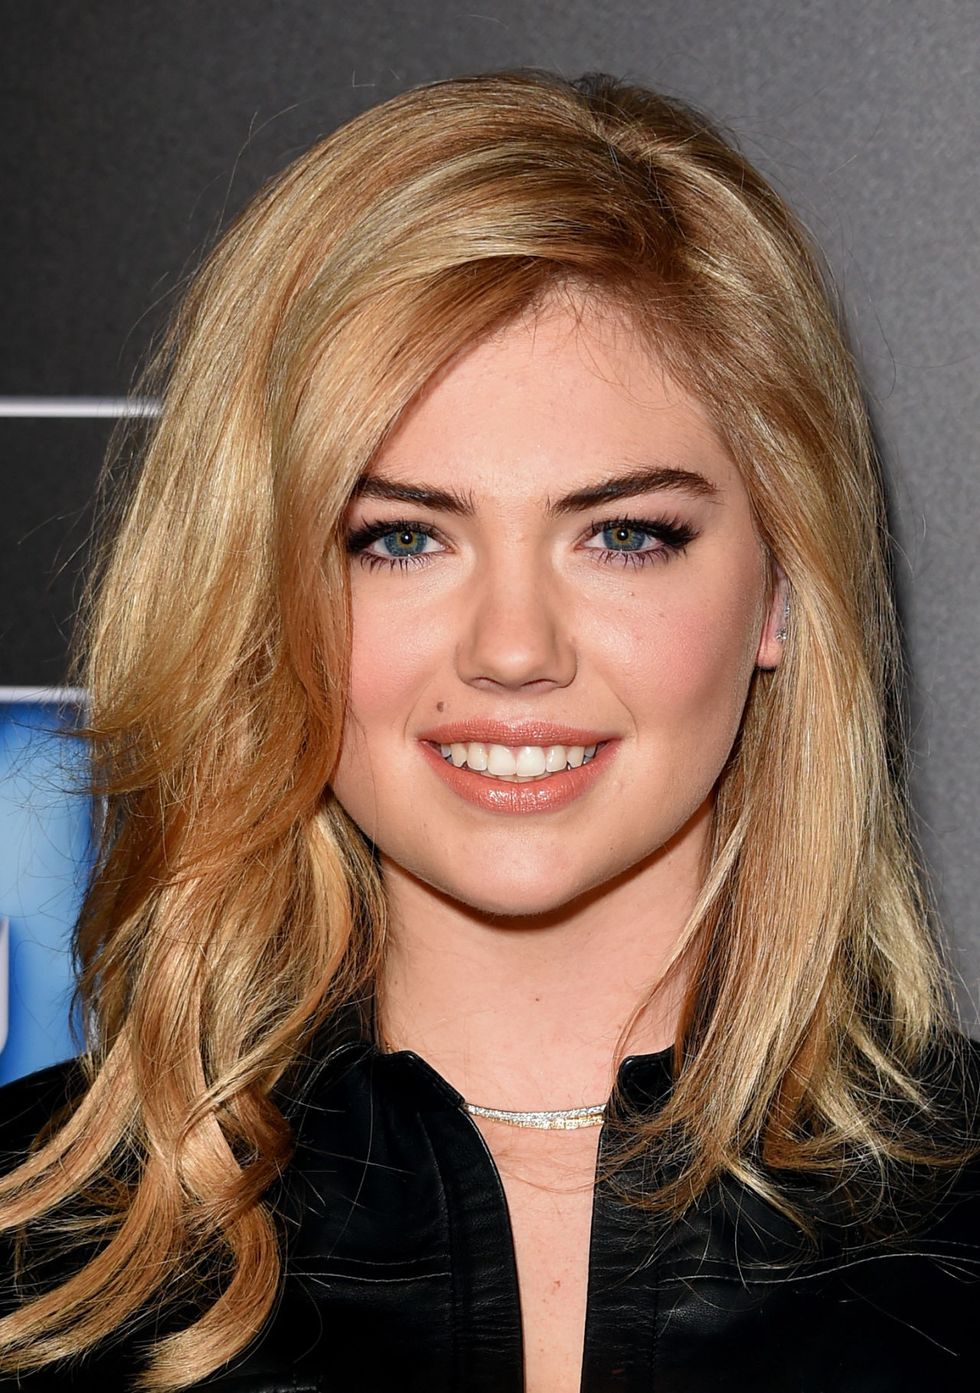 Kate Upton - 11 celebrities with gorgeous beauty spots